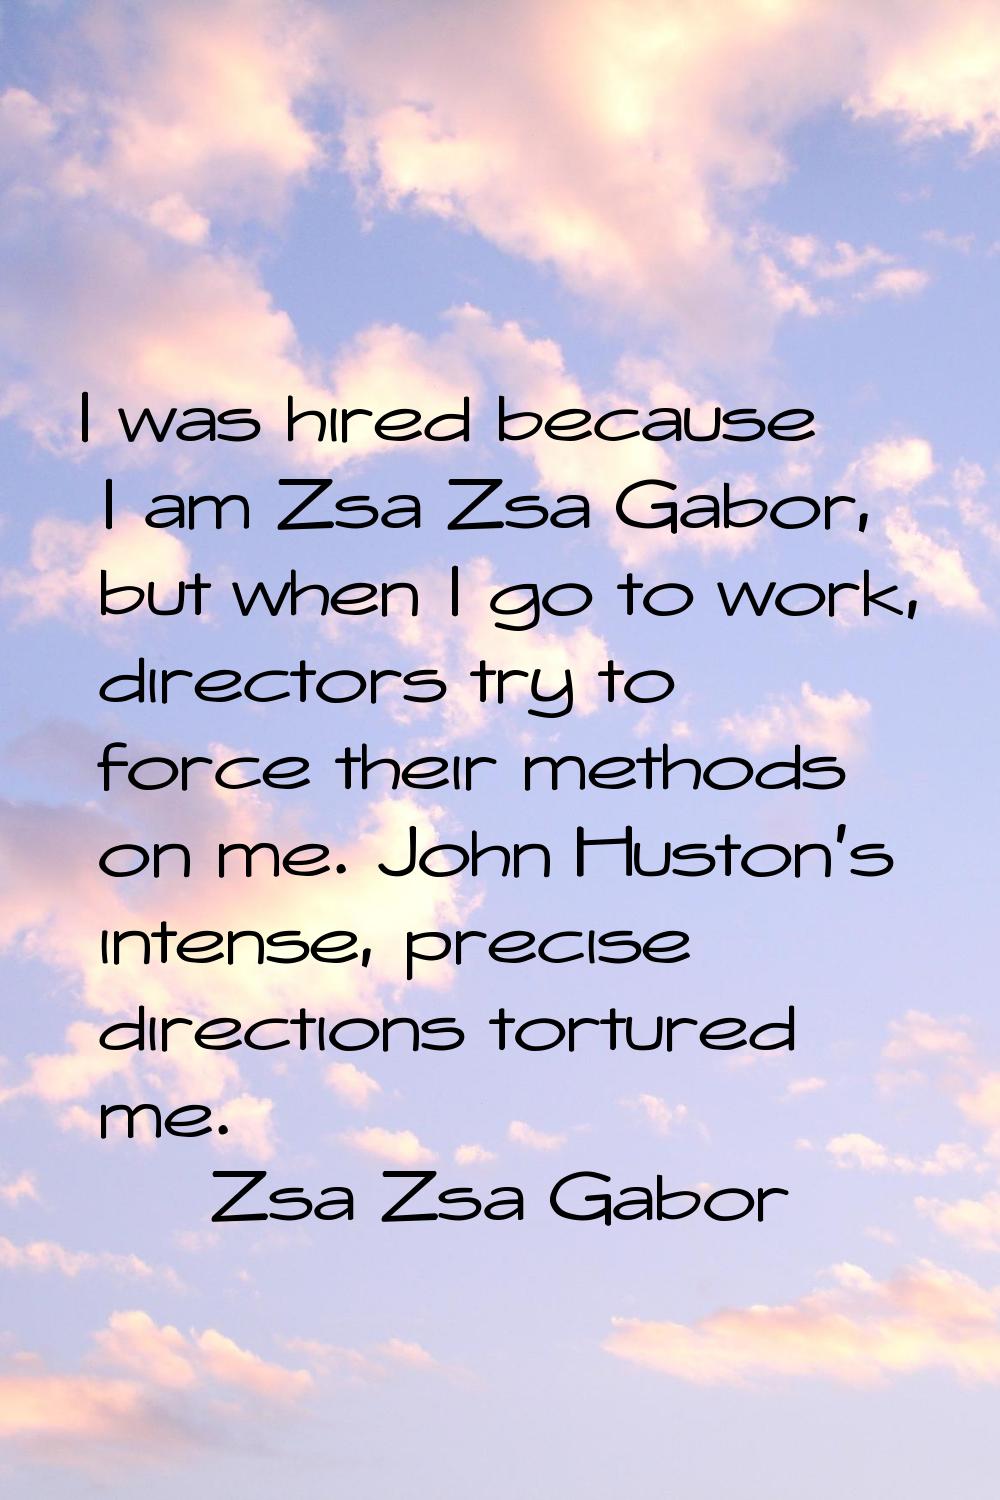 I was hired because I am Zsa Zsa Gabor, but when I go to work, directors try to force their methods